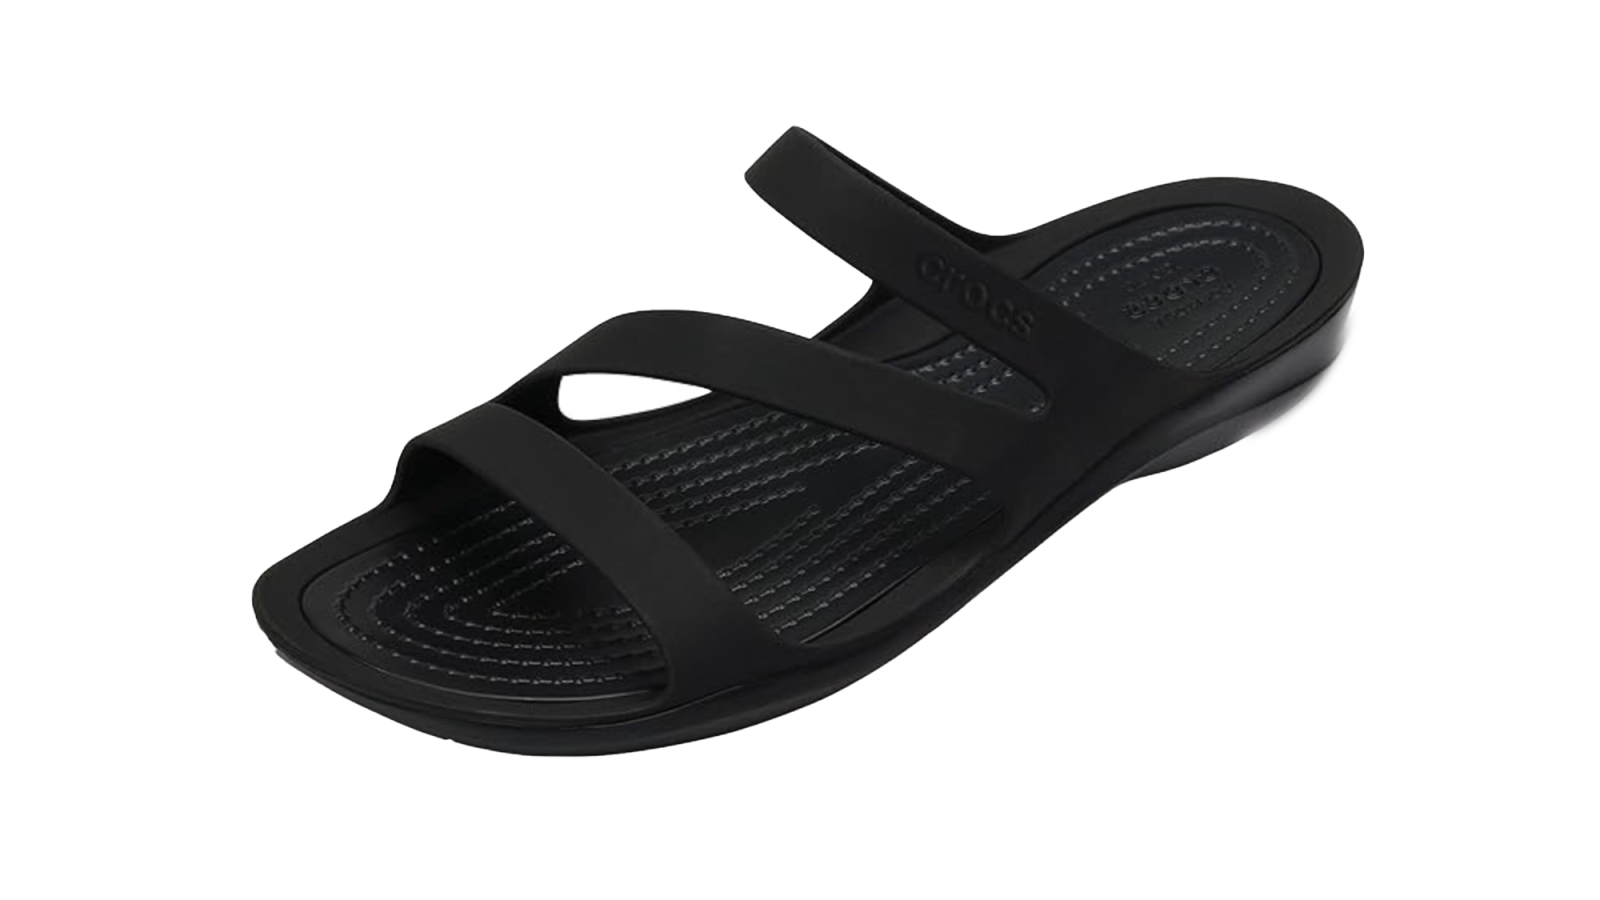 Get This 'Cute' Pair of Crocs Sandals for $30 at Amazon | Us Weekly